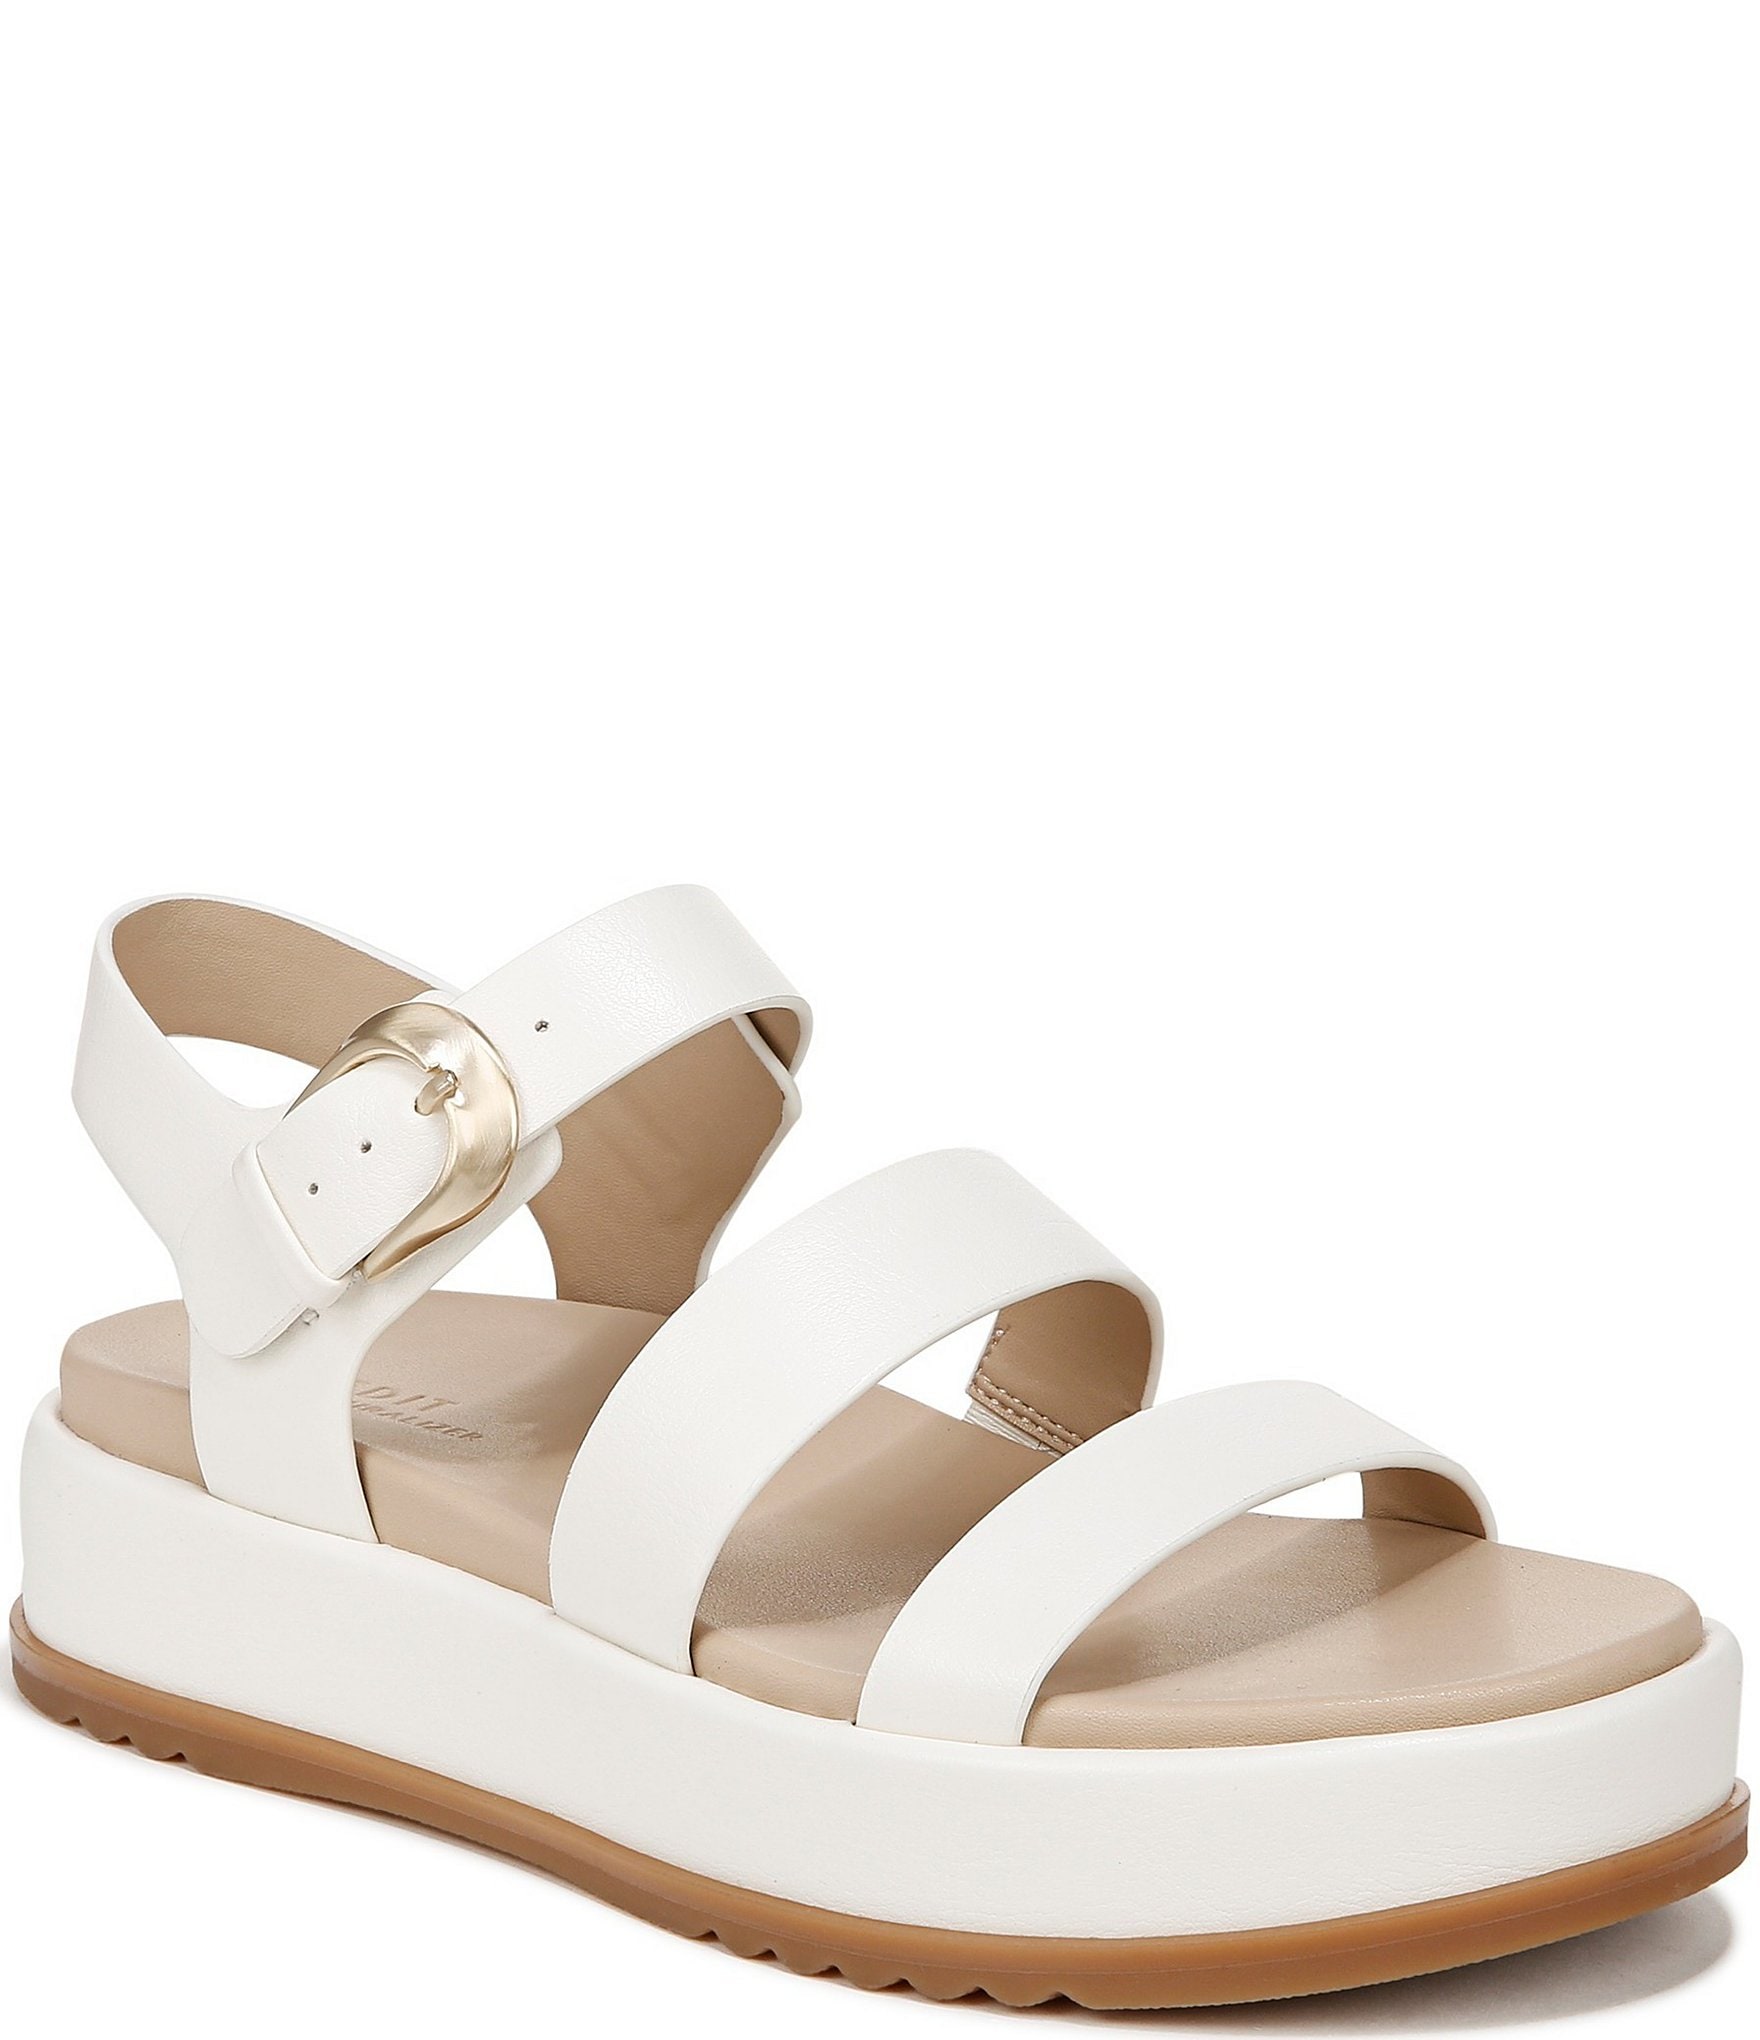 Leather zirinas in various colors with a wide strap - Sandals for women